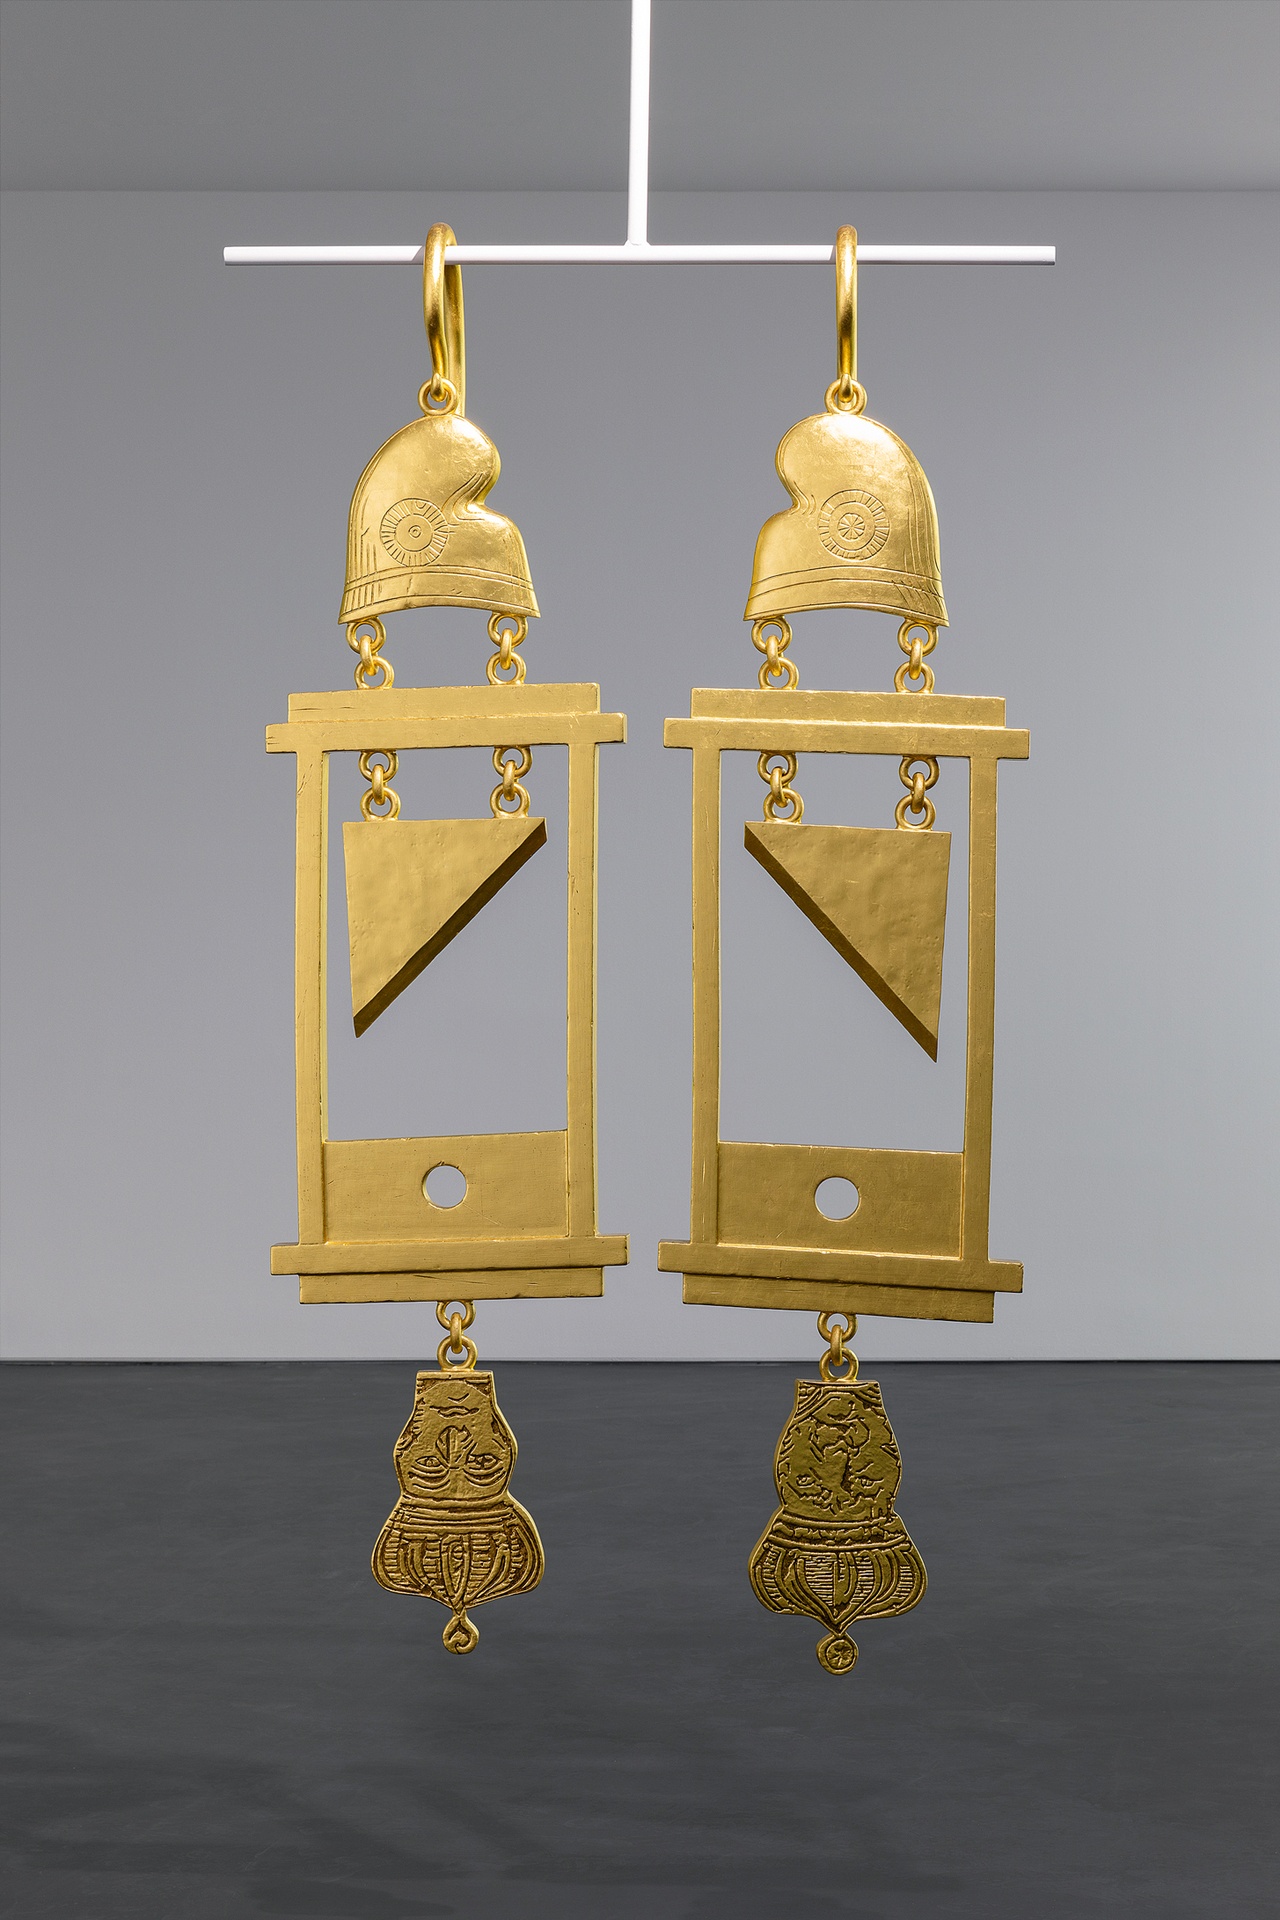 Simon Fujiwara, „A Dramatically Enlarged Set of Golden Guillotine Earrings Depicting the Severed Heads of Marie Antoinette and King Louis XVI“, 2019